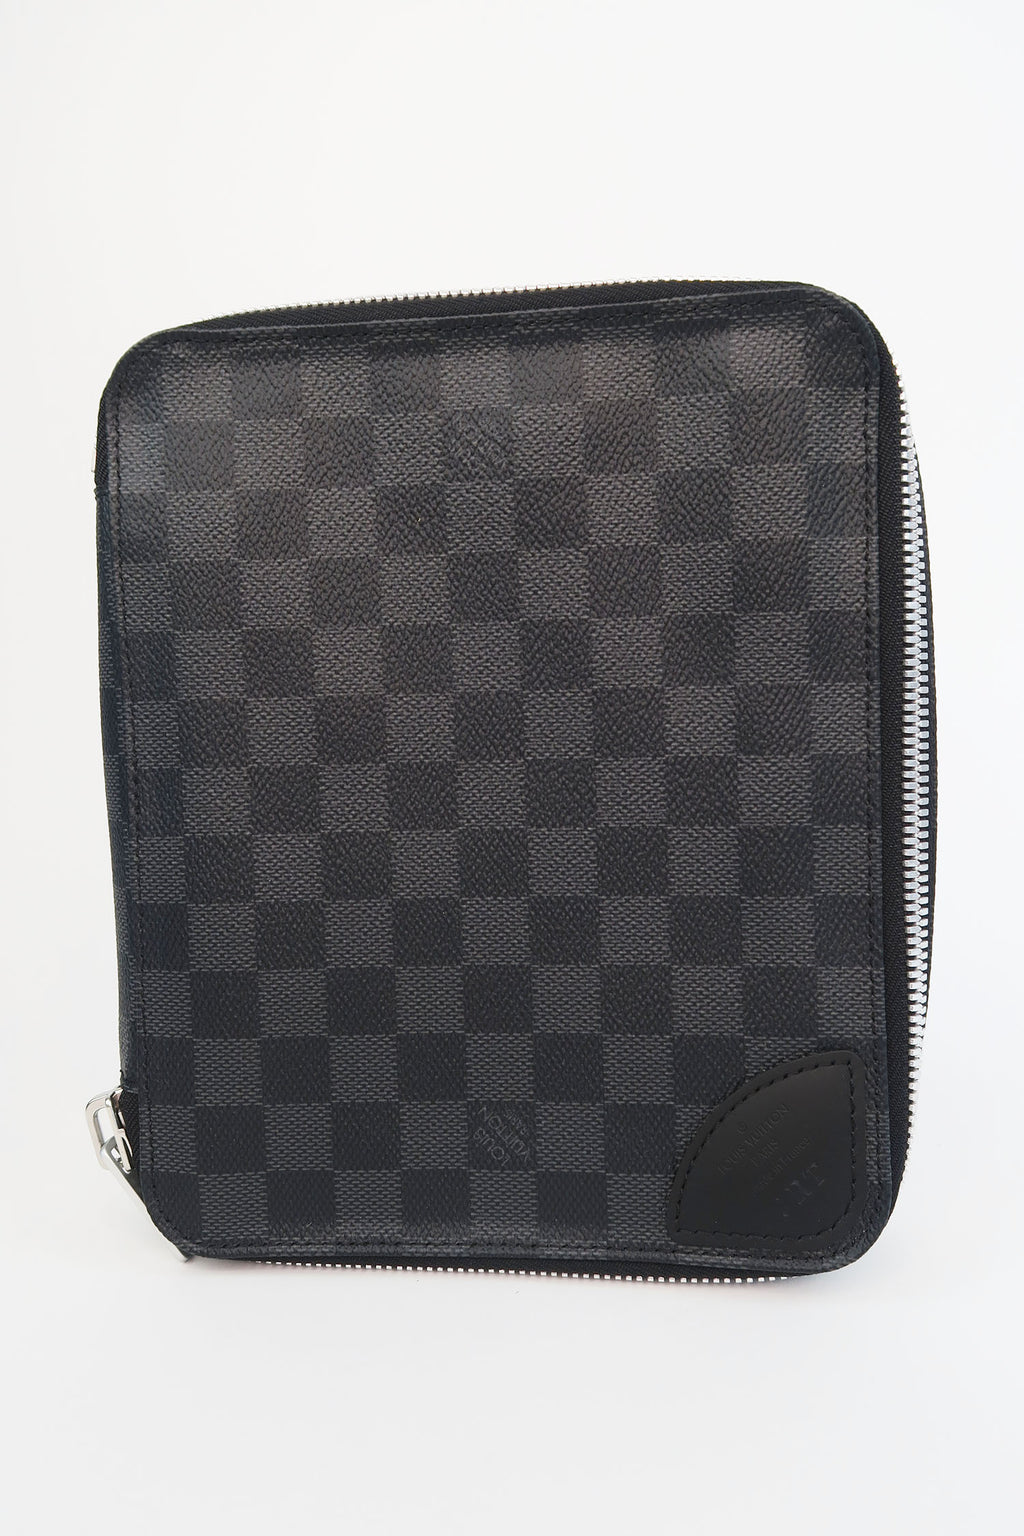 Shop Louis Vuitton 2021-22FW Packing cube pm (M44697) by nordsud